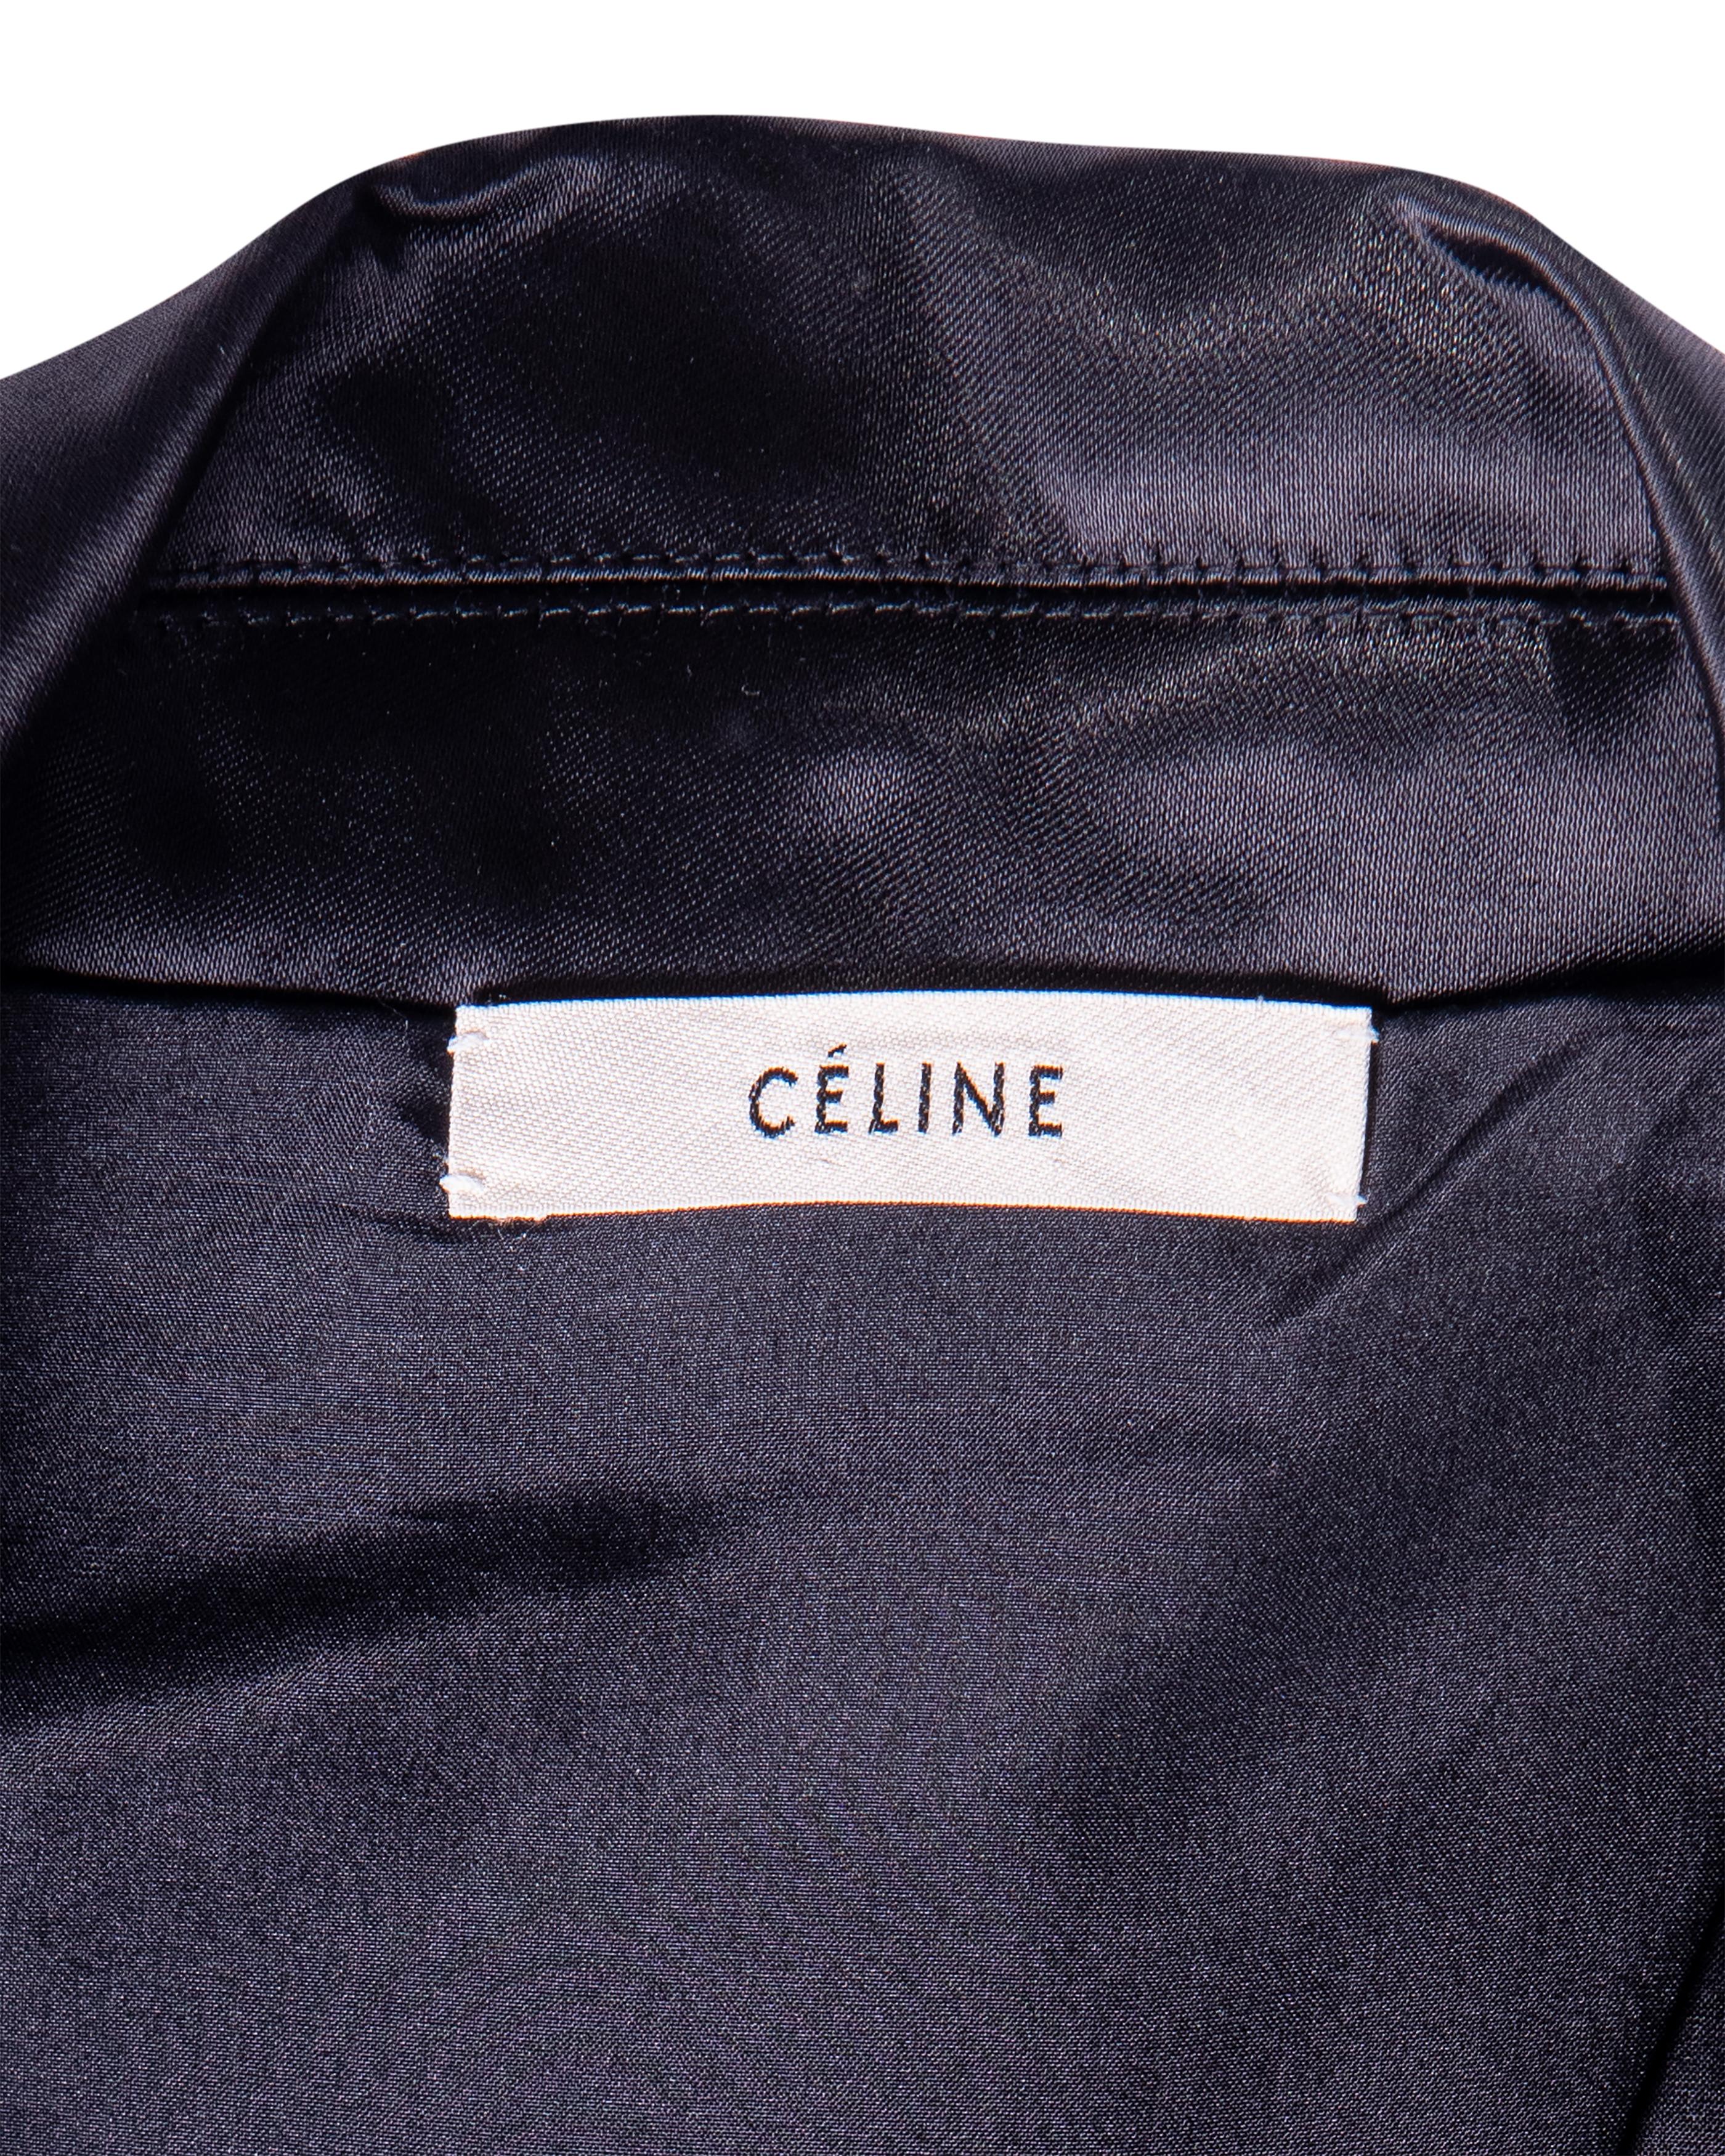 Pre-Fall 2014 Céline by Phoebe Philo Black Shearling Coat with Gray Accents For Sale 8